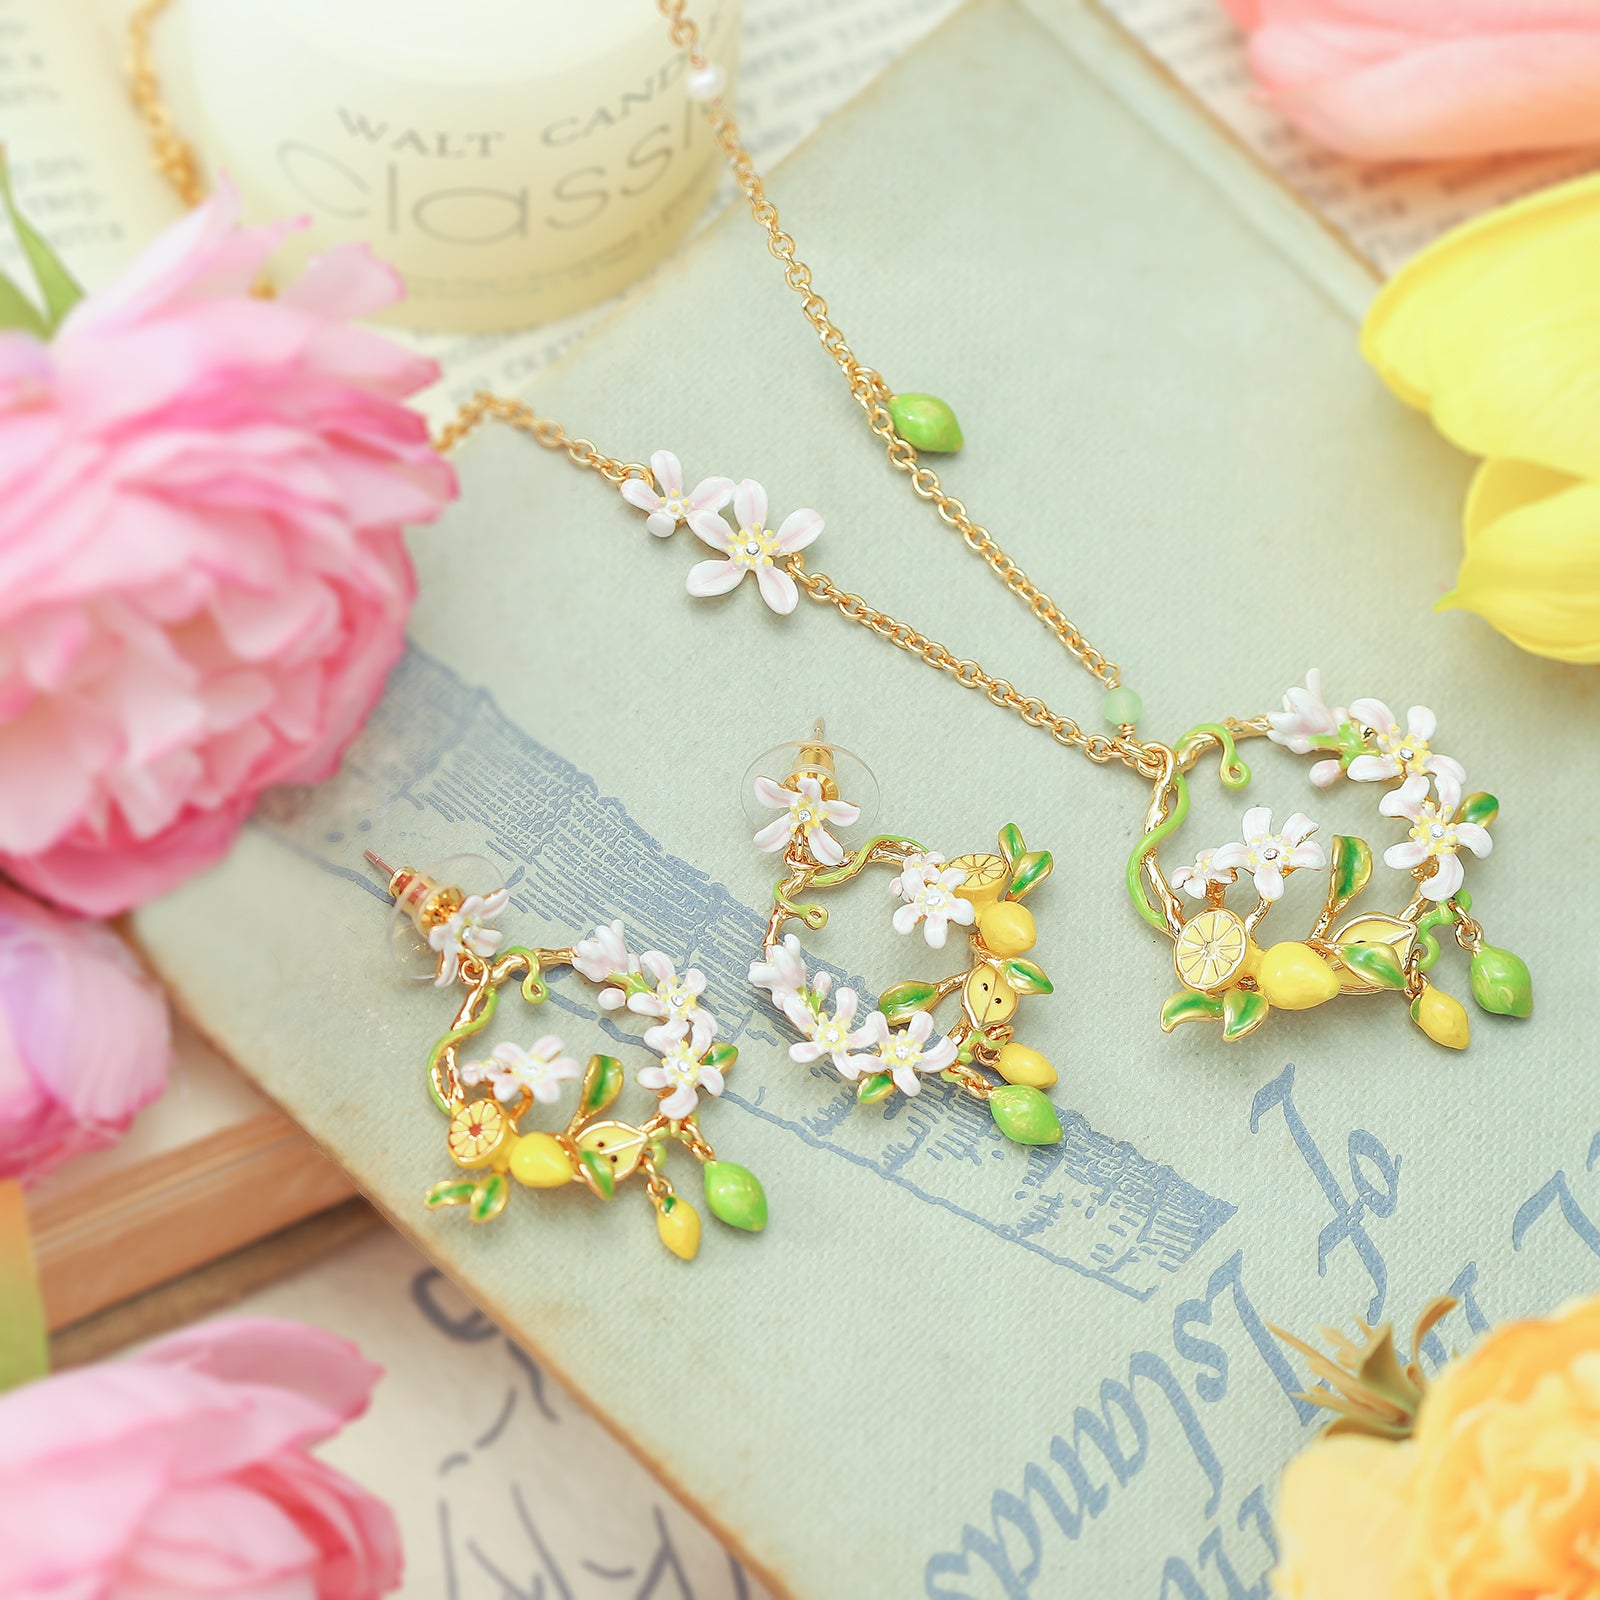 Lemon Garland Necklace and Earrings